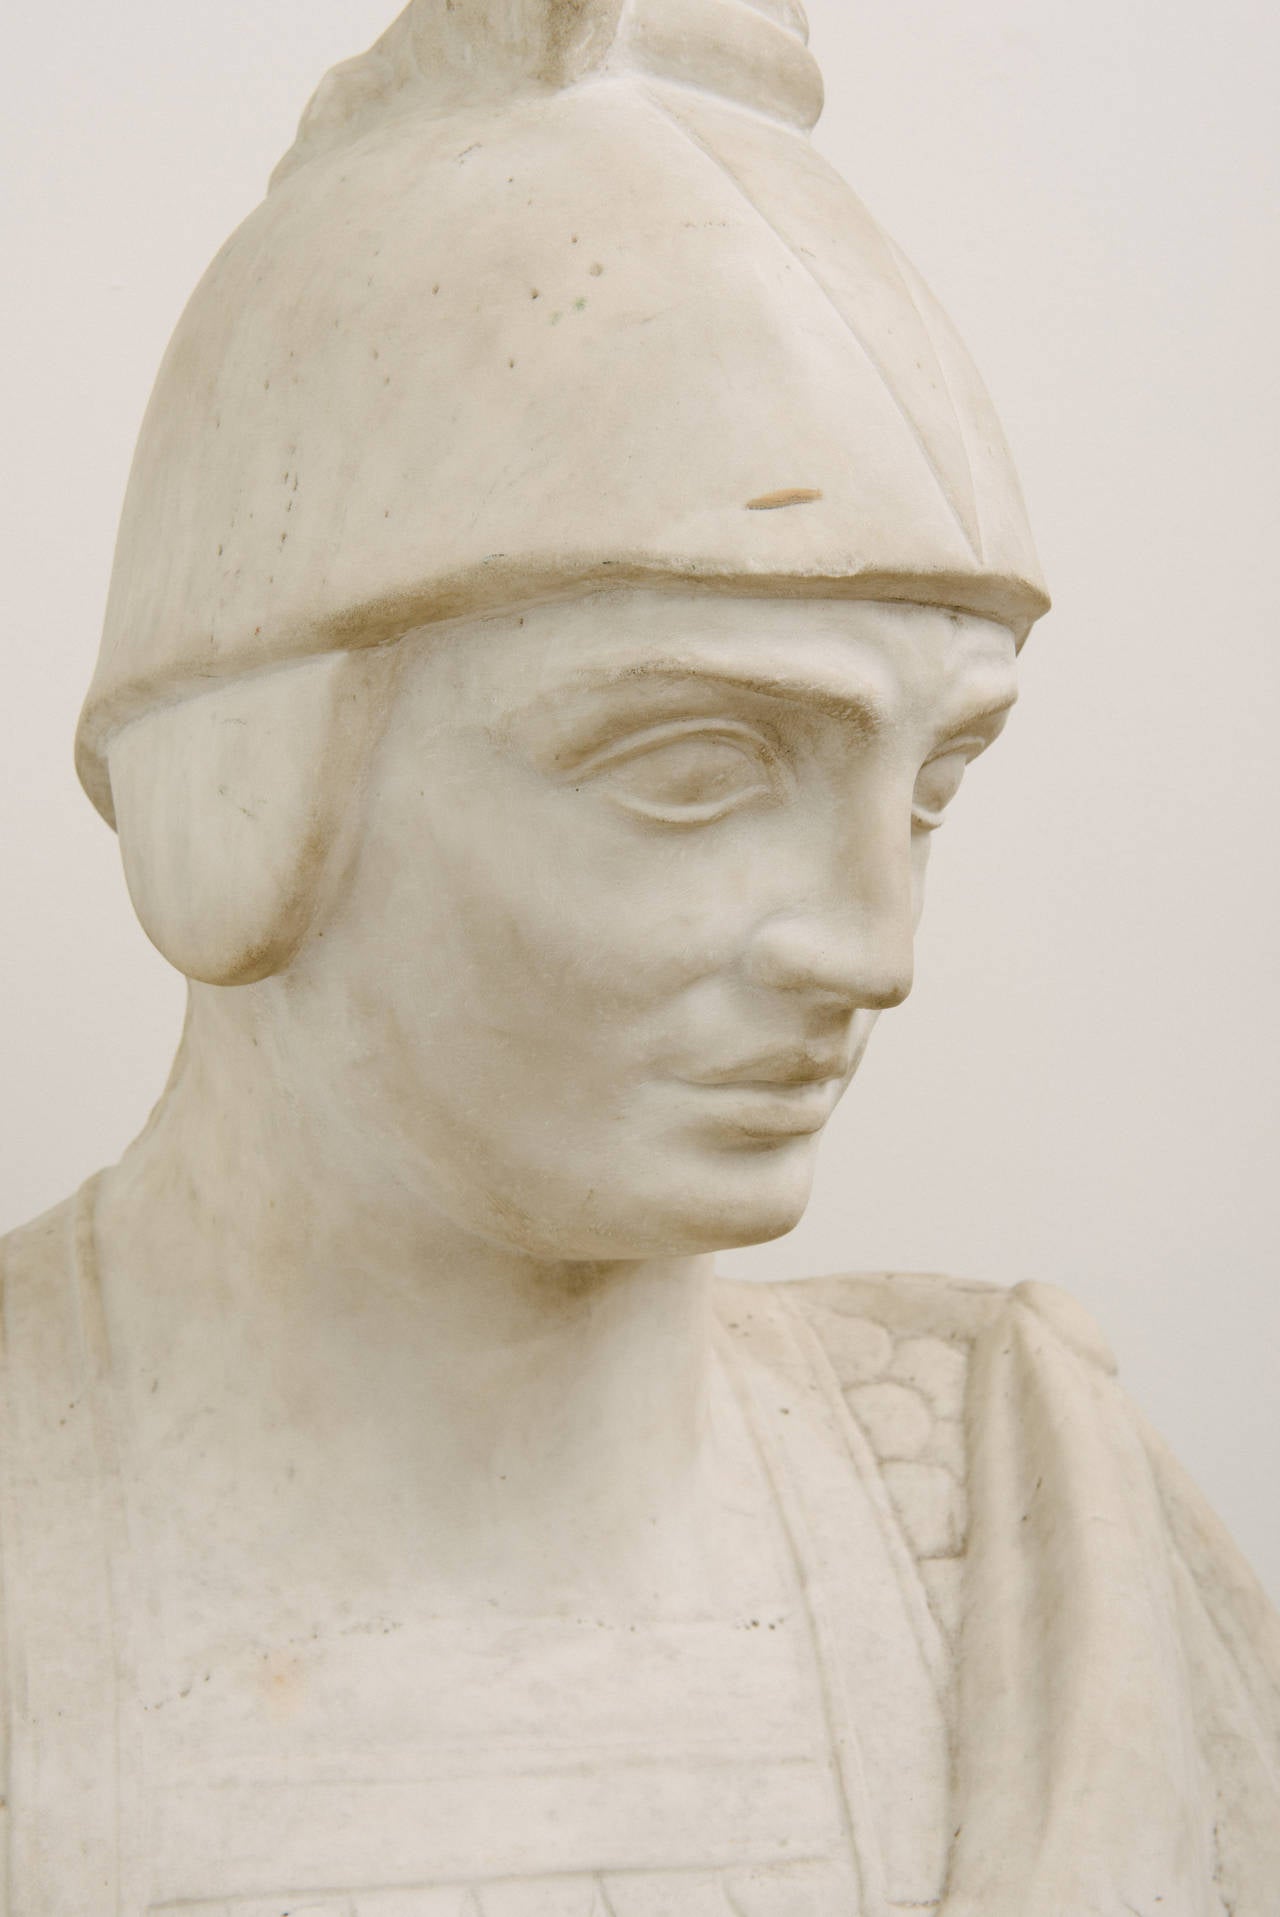 A handsome large Italian marble bust sculpture of Roman soldier from the early 20th century. Measures: 33